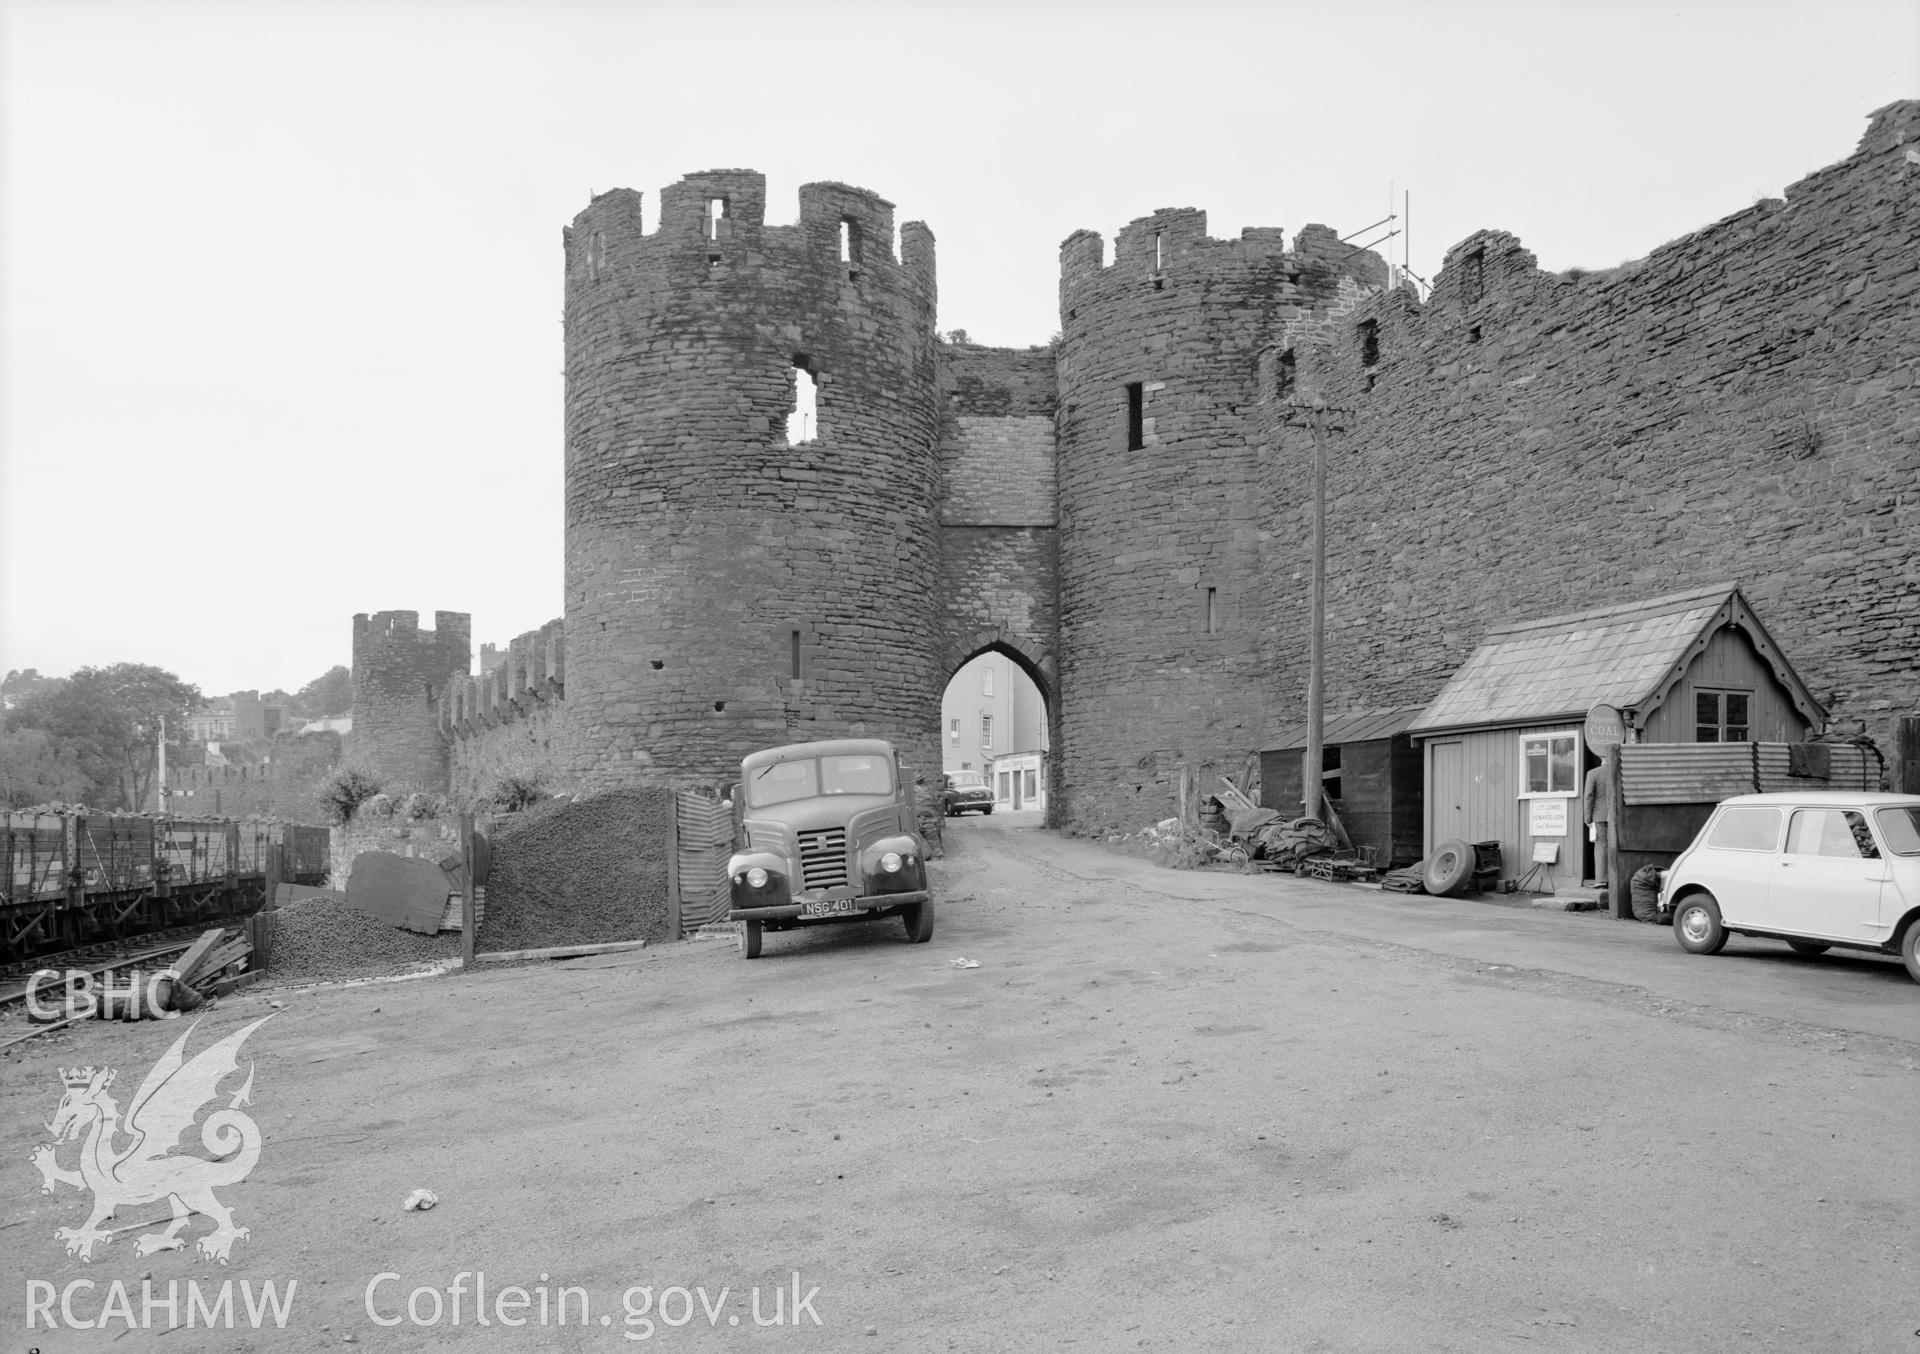 D.O.E photograph of Conwy Town Walls - south tower from the north, tower wall walk.